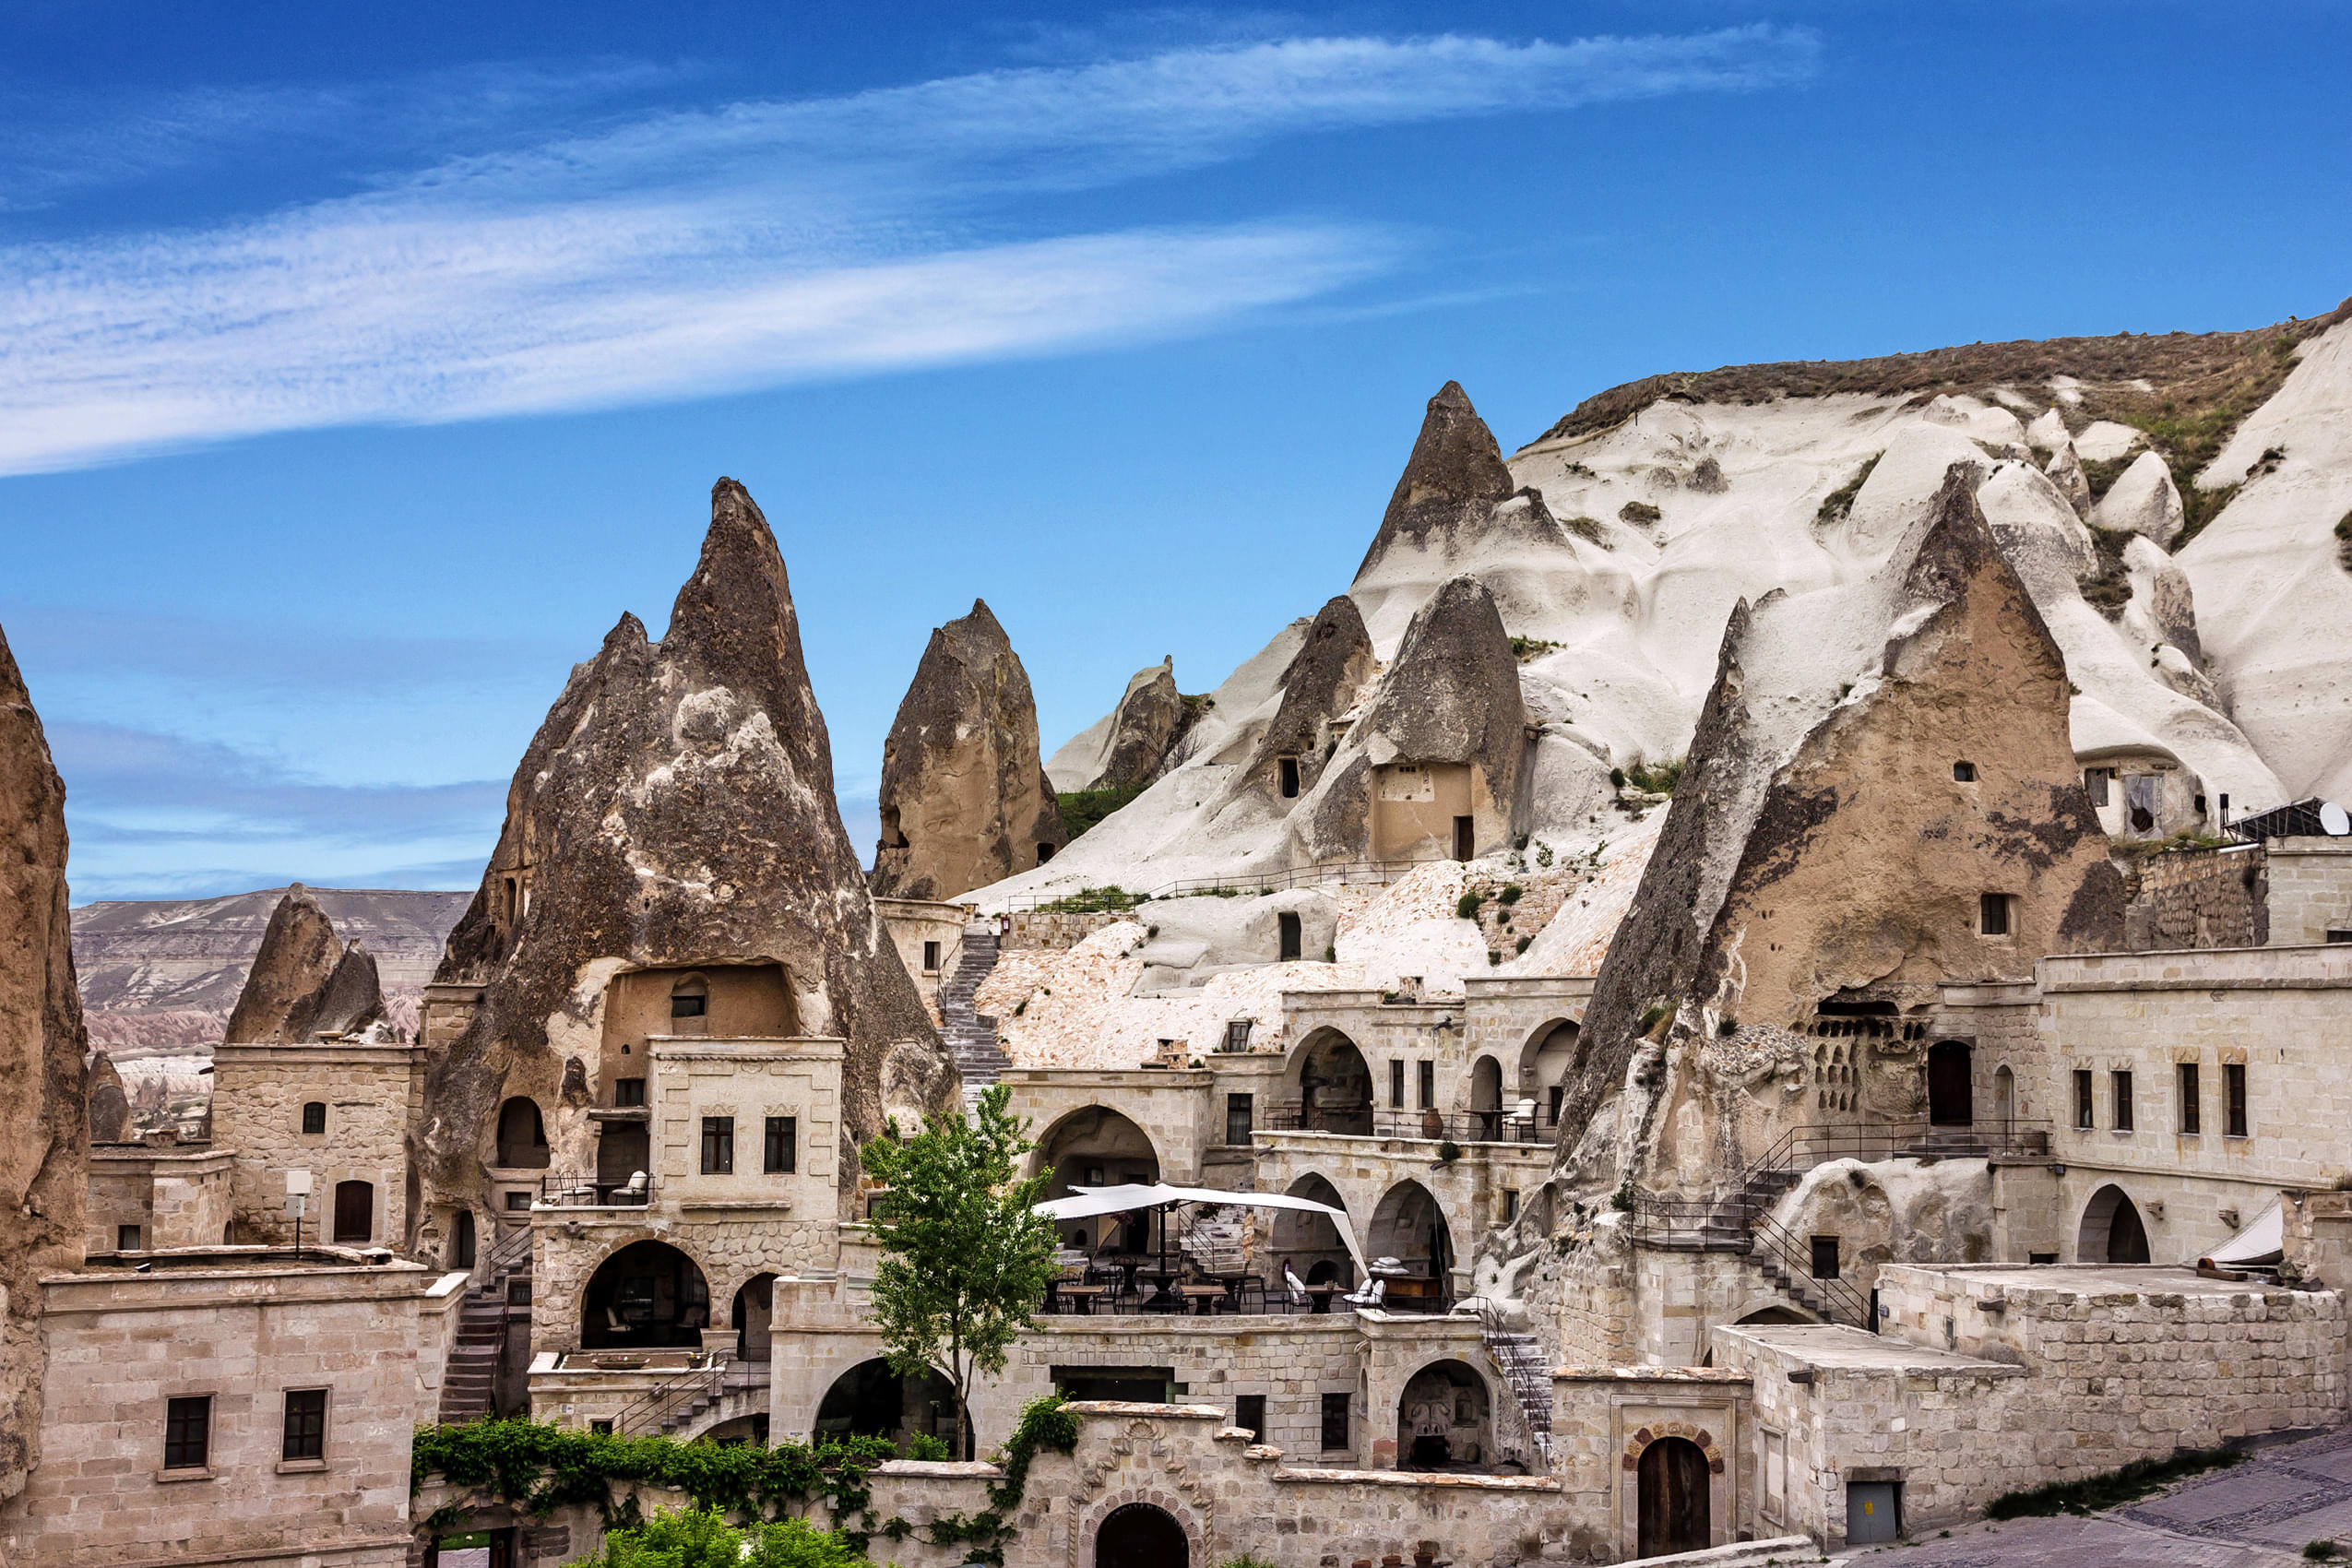 Goreme Open Air Museum Overview